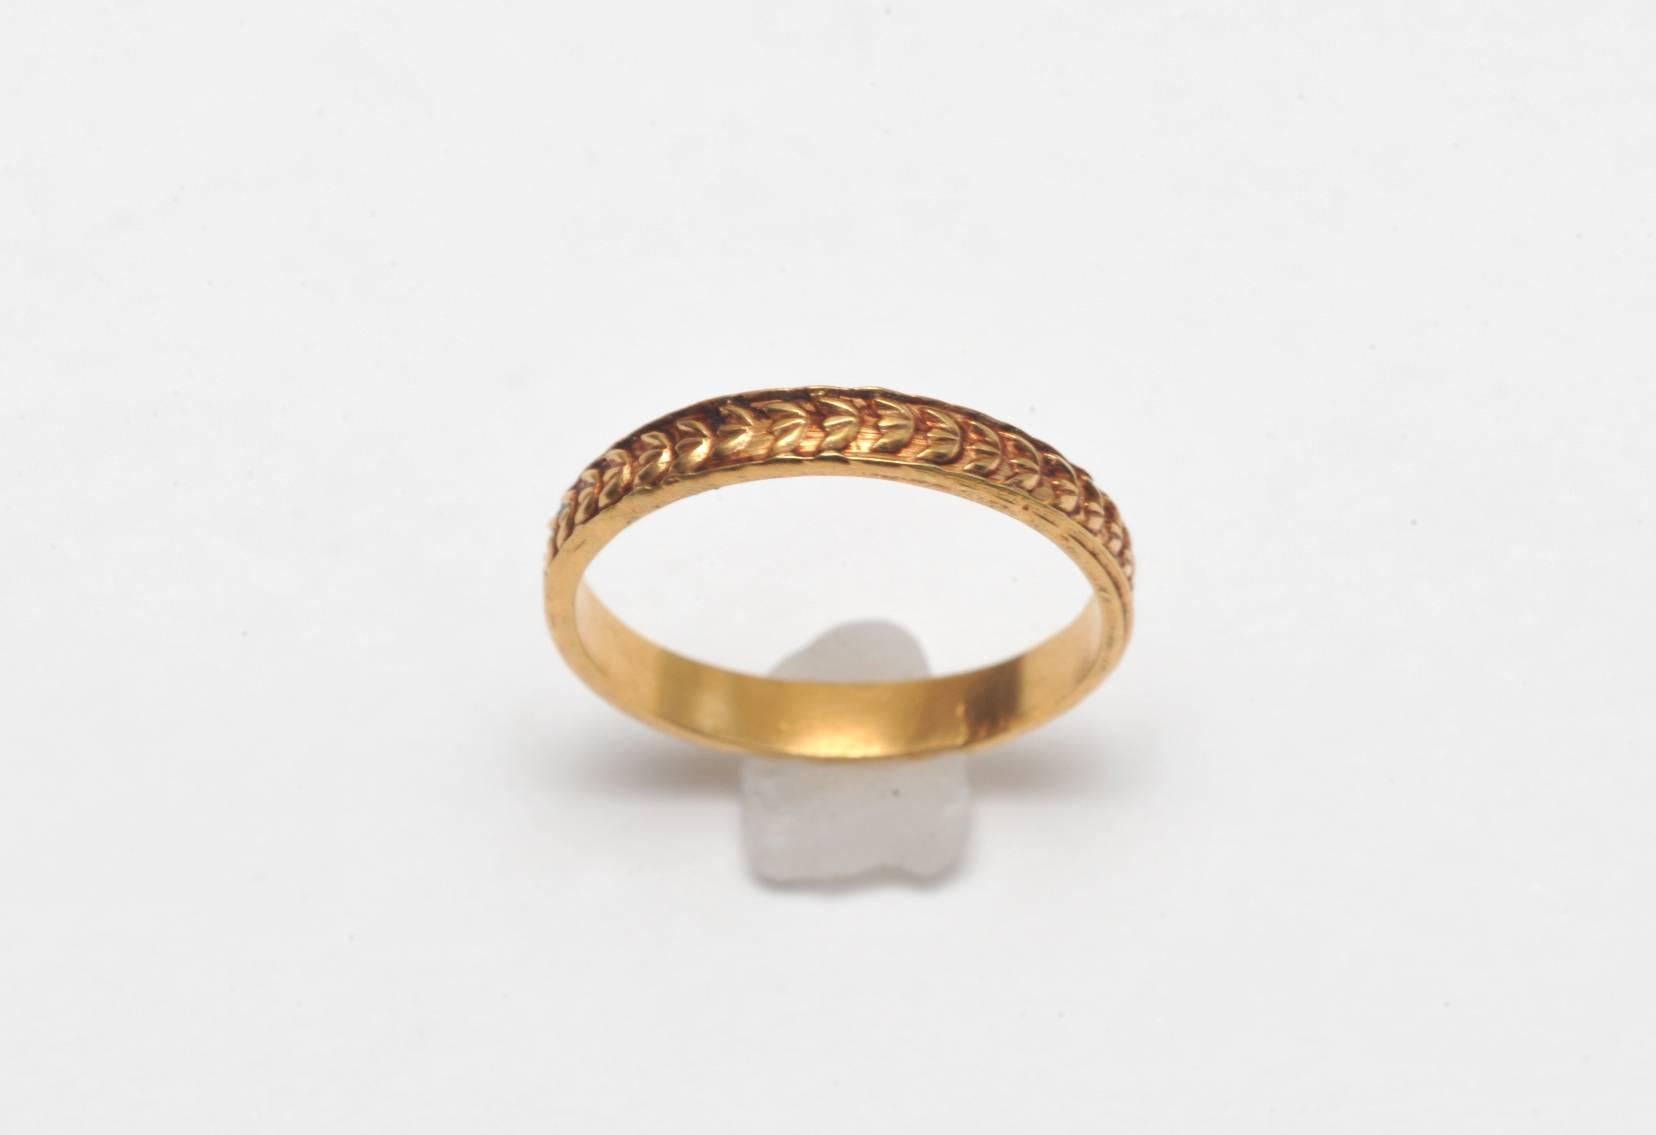 Unusual and different, a 22K gold band with hand-tooled laurel wreath design all the way around.  Size is 7.5.